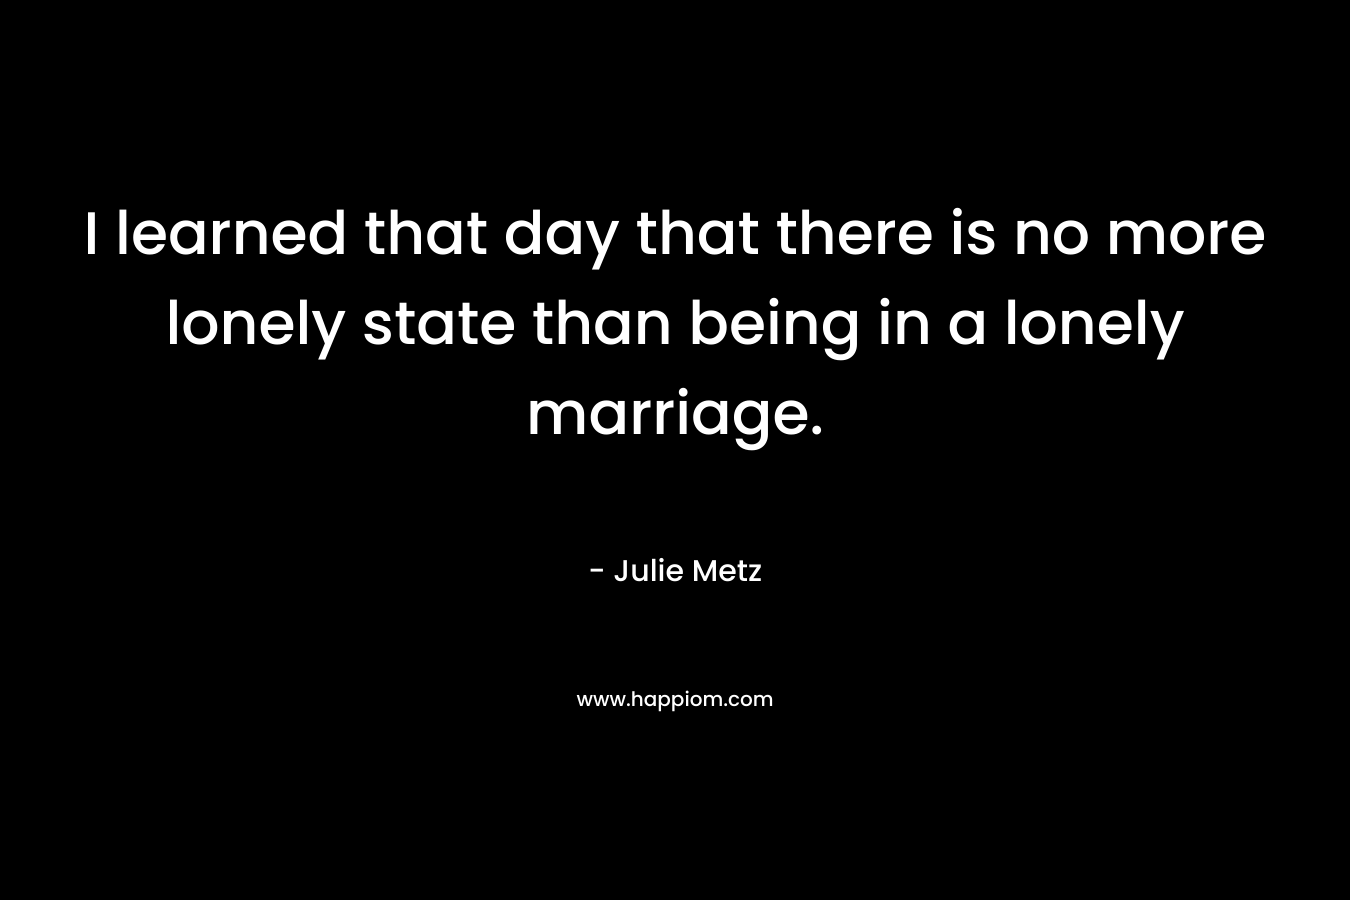 I learned that day that there is no more lonely state than being in a lonely marriage.